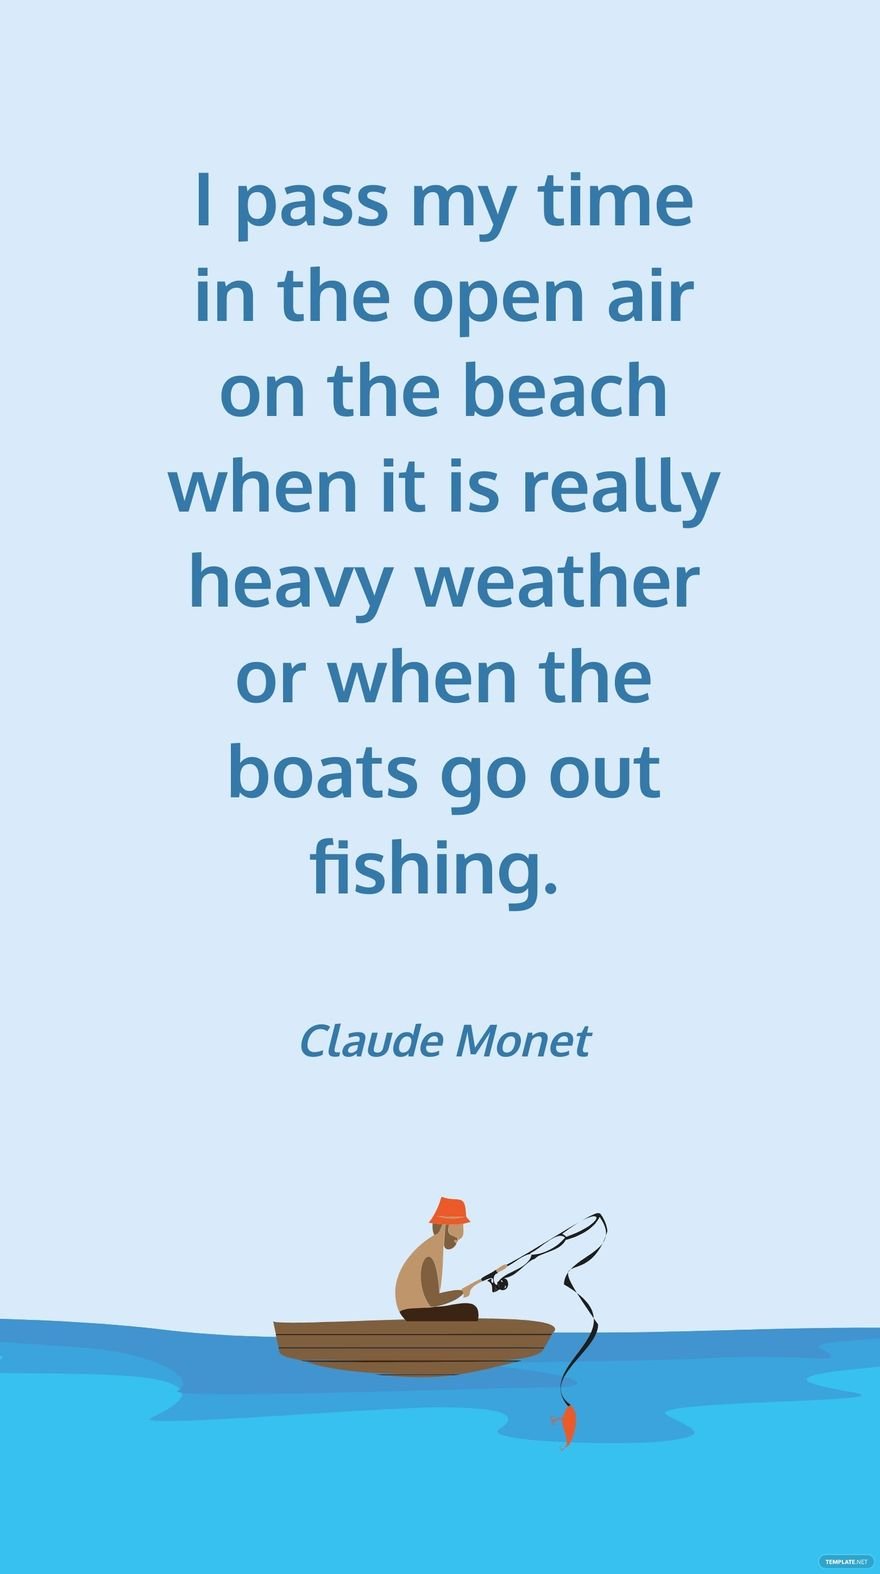 Claude Monet - I pass my time in the open air on the beach when it is really heavy weather or when the boats go out fishing. in JPG